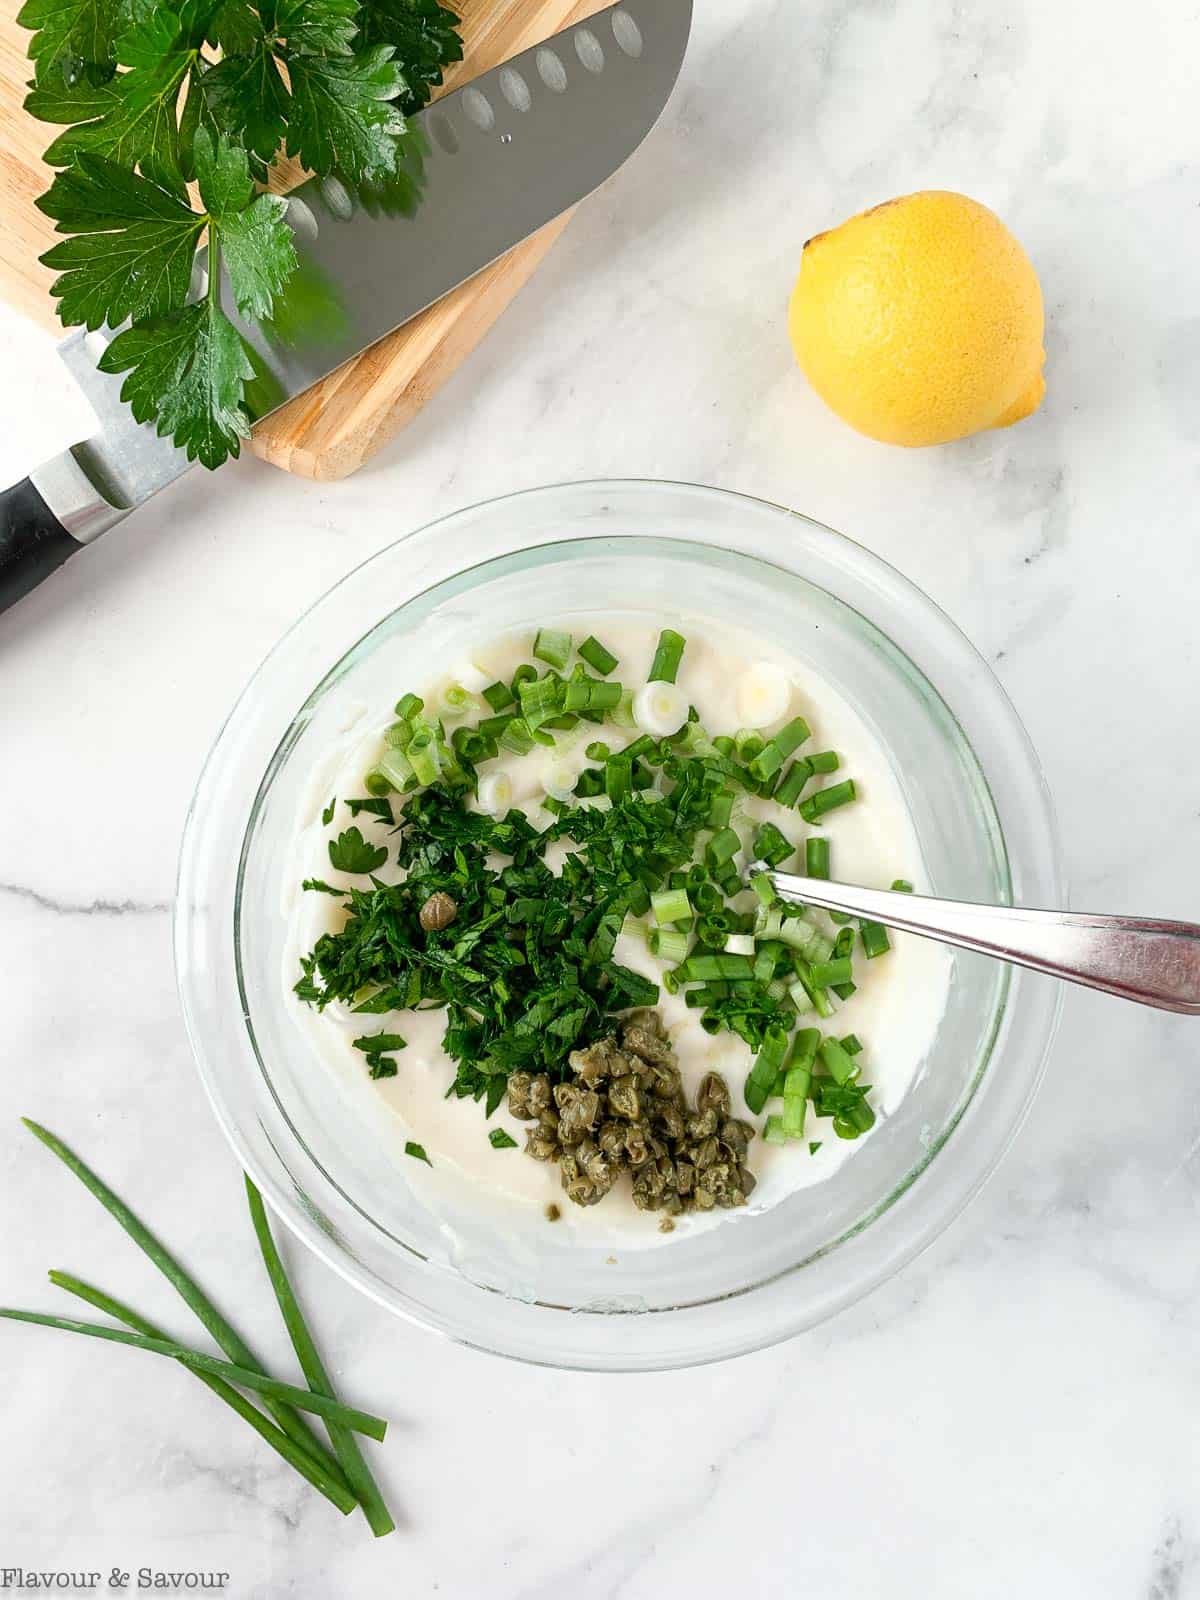 Ingredients for Creamy Herb Sour Cream Dip